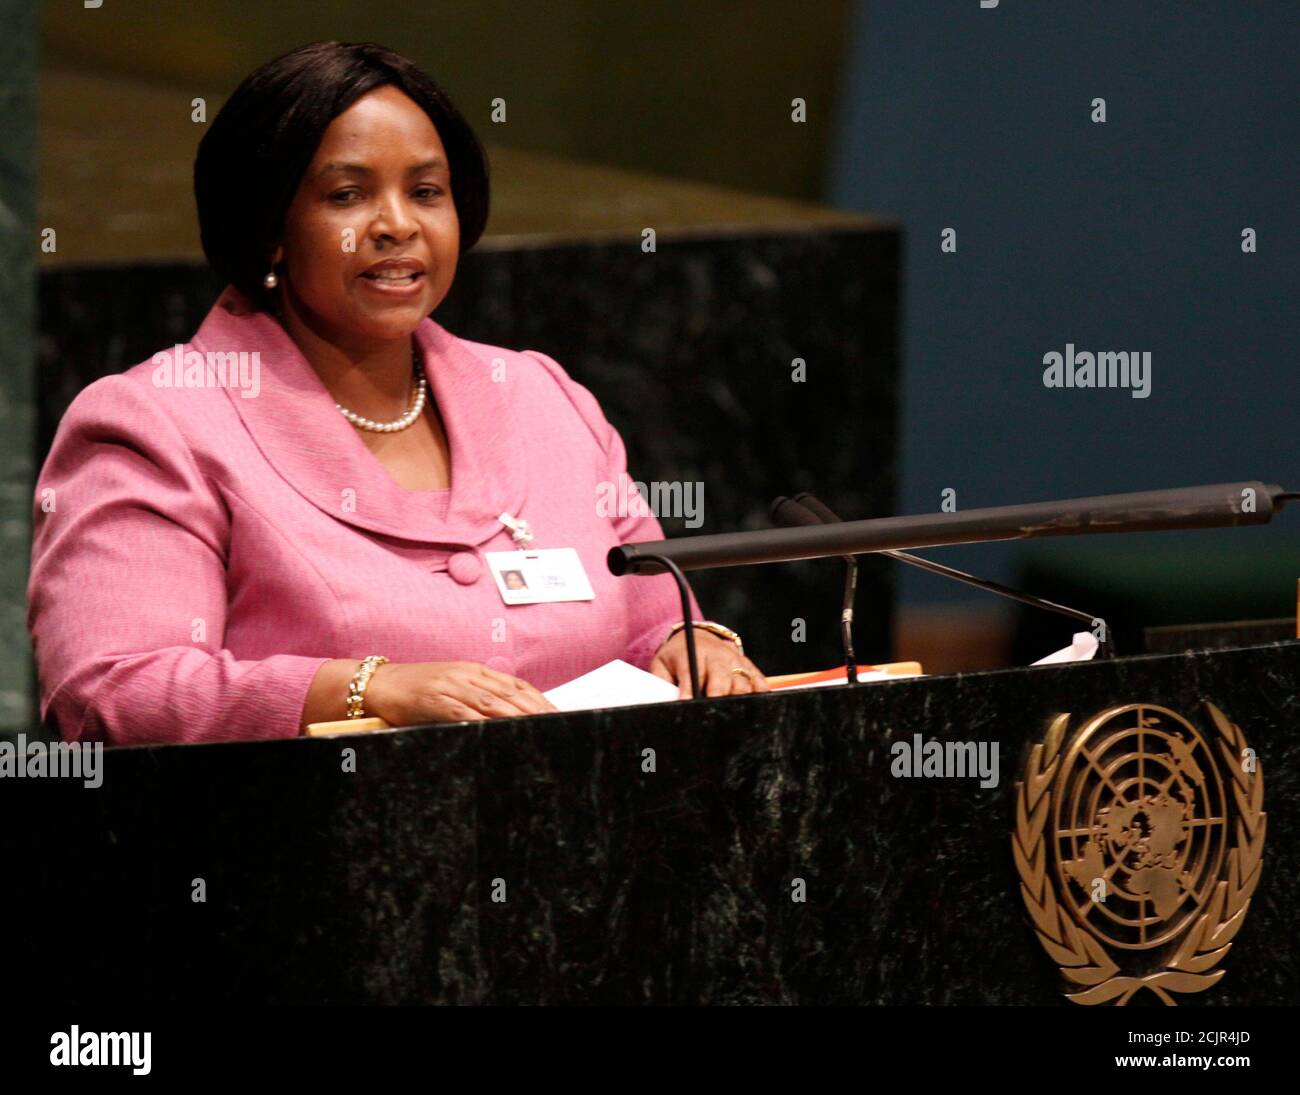 Maite Nkoana-Mashabane, Minister of International Relations and Cooperation of South Africa, speaks at the United Nations conference on the World Financial and Economical Crisis in New York, June 24, 2009.  REUTERS/Brendan McDermid (UNITED STATES POLITICS BUSINESS) Stock Photo